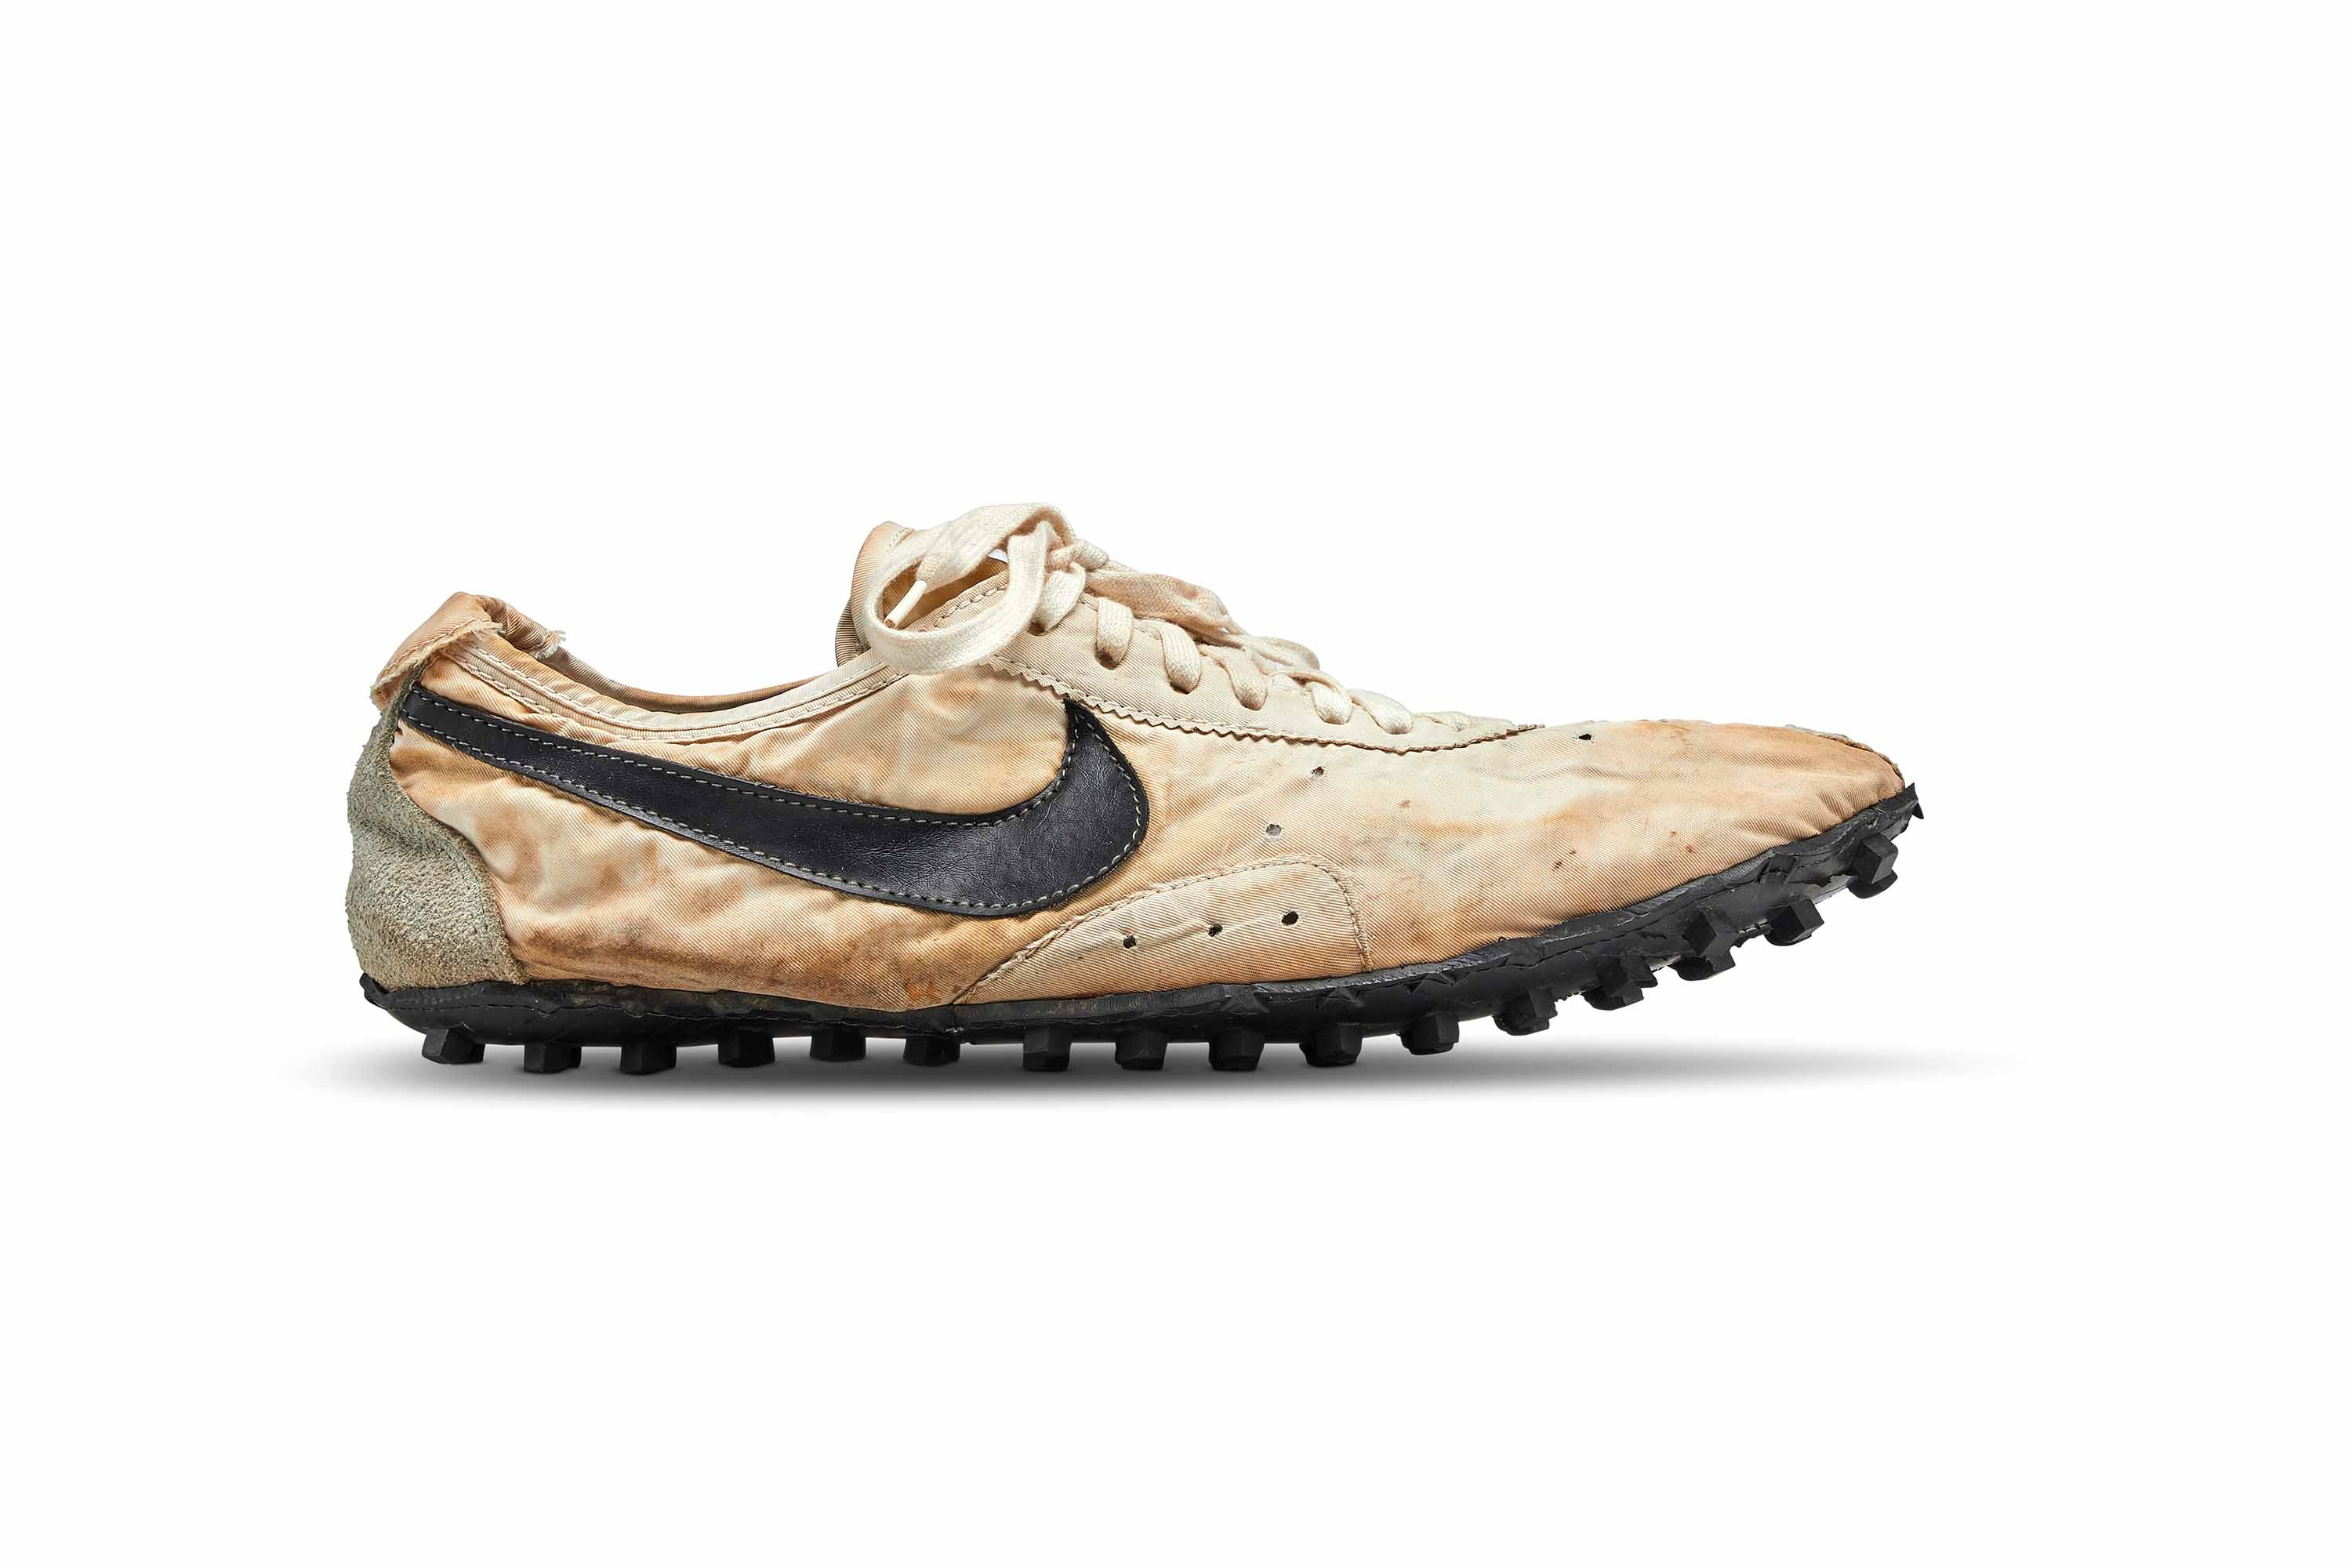 Nike's rare 'Moon is sold for $437,500, shattering the auction record for sneakers CNN